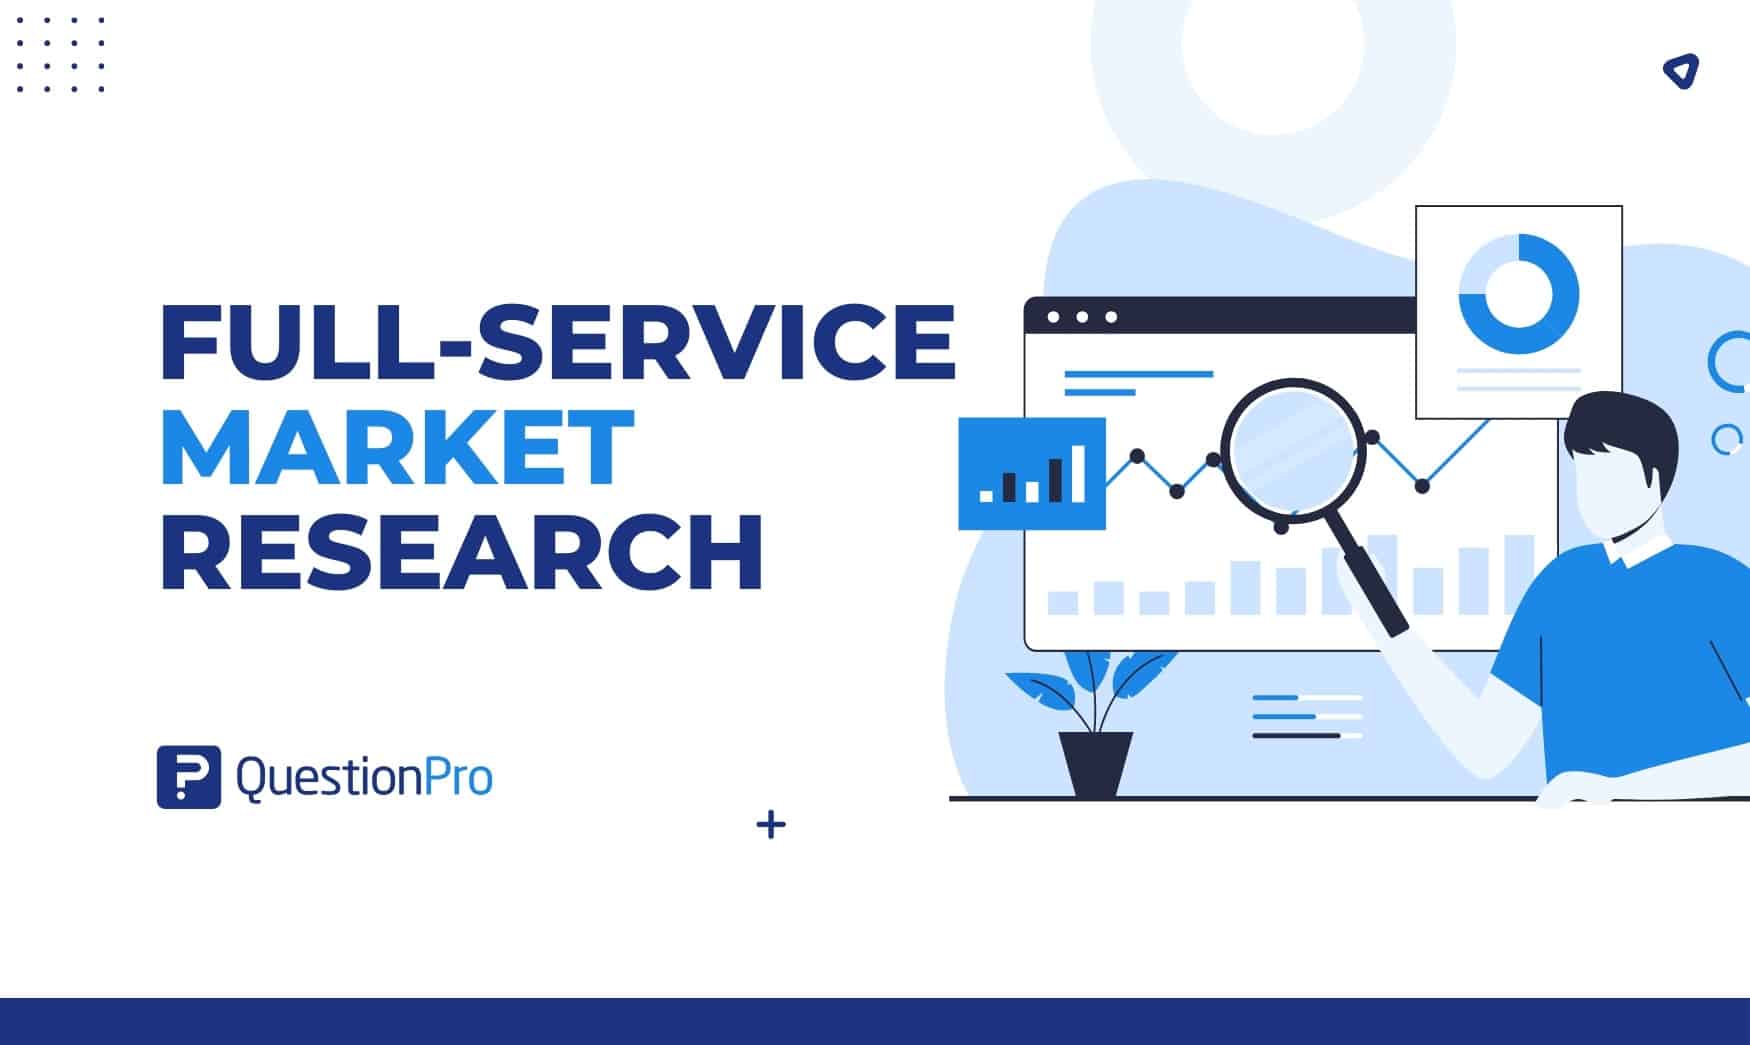 Full-service market research